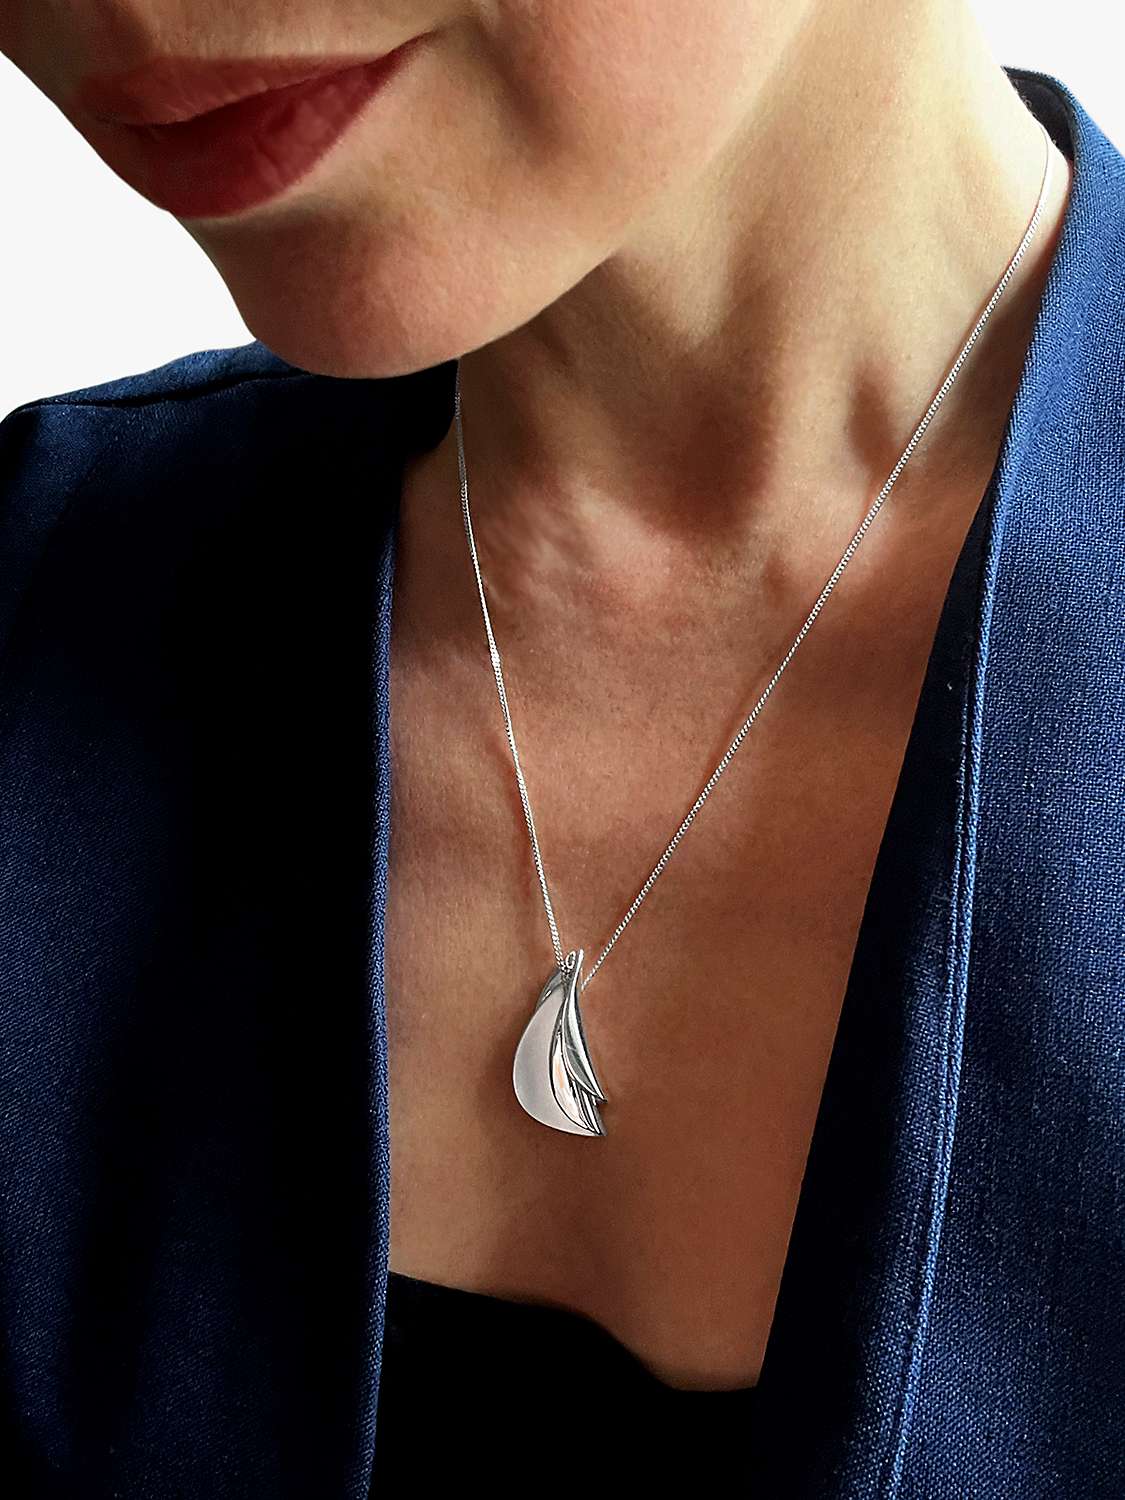 Buy Nina B Double Fold Pendant & Chain, Silver Online at johnlewis.com